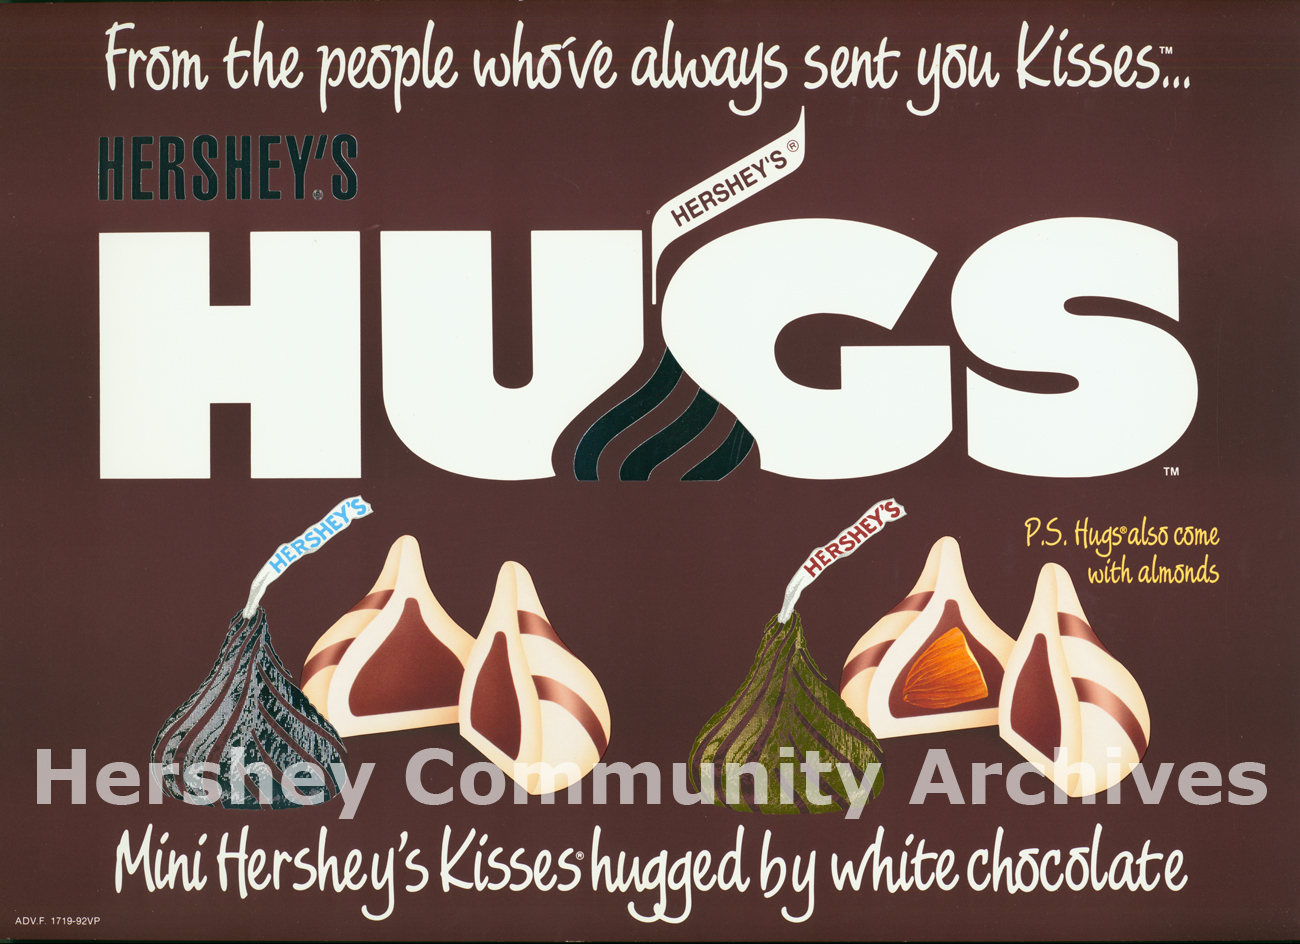 Valentine's Day History: How the Hershey's Kiss Came to Be